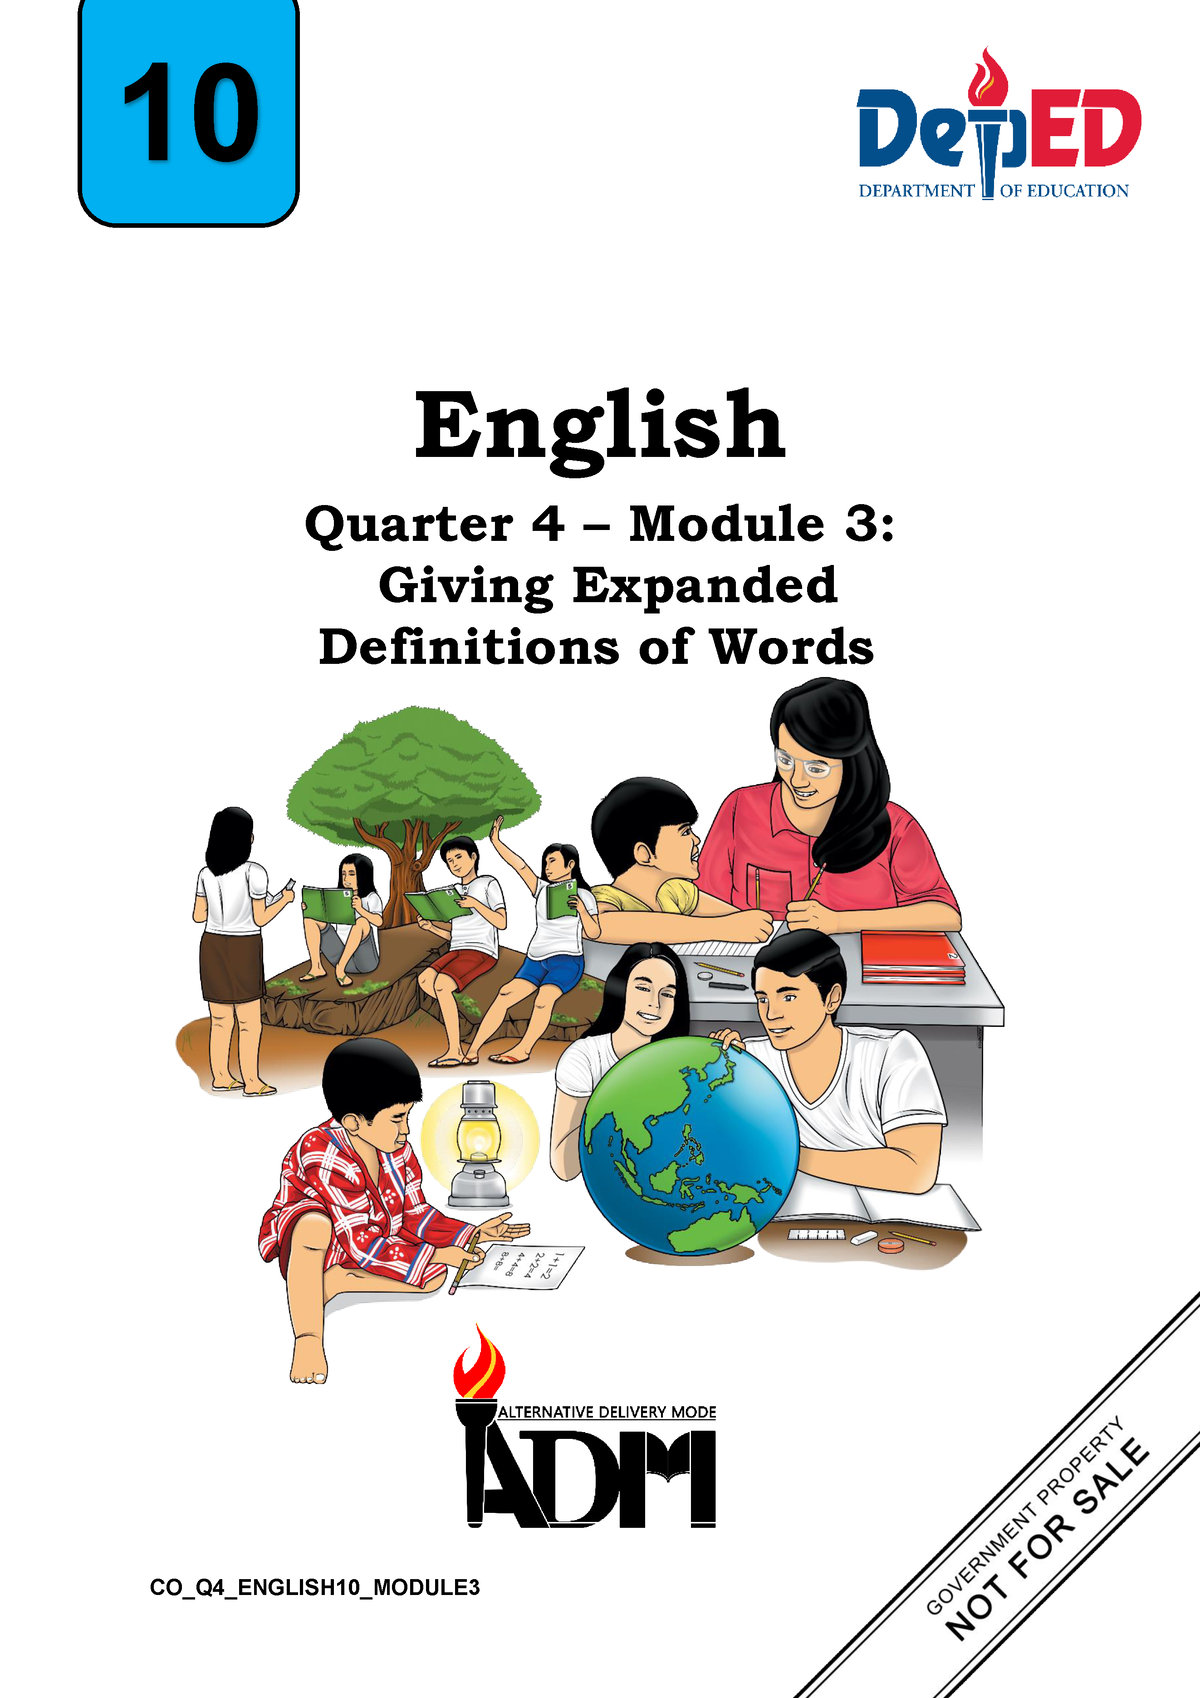 english-10-mod3-giving-expanded-definitions-of-words-co-q4-english10-module-english-quarter-4